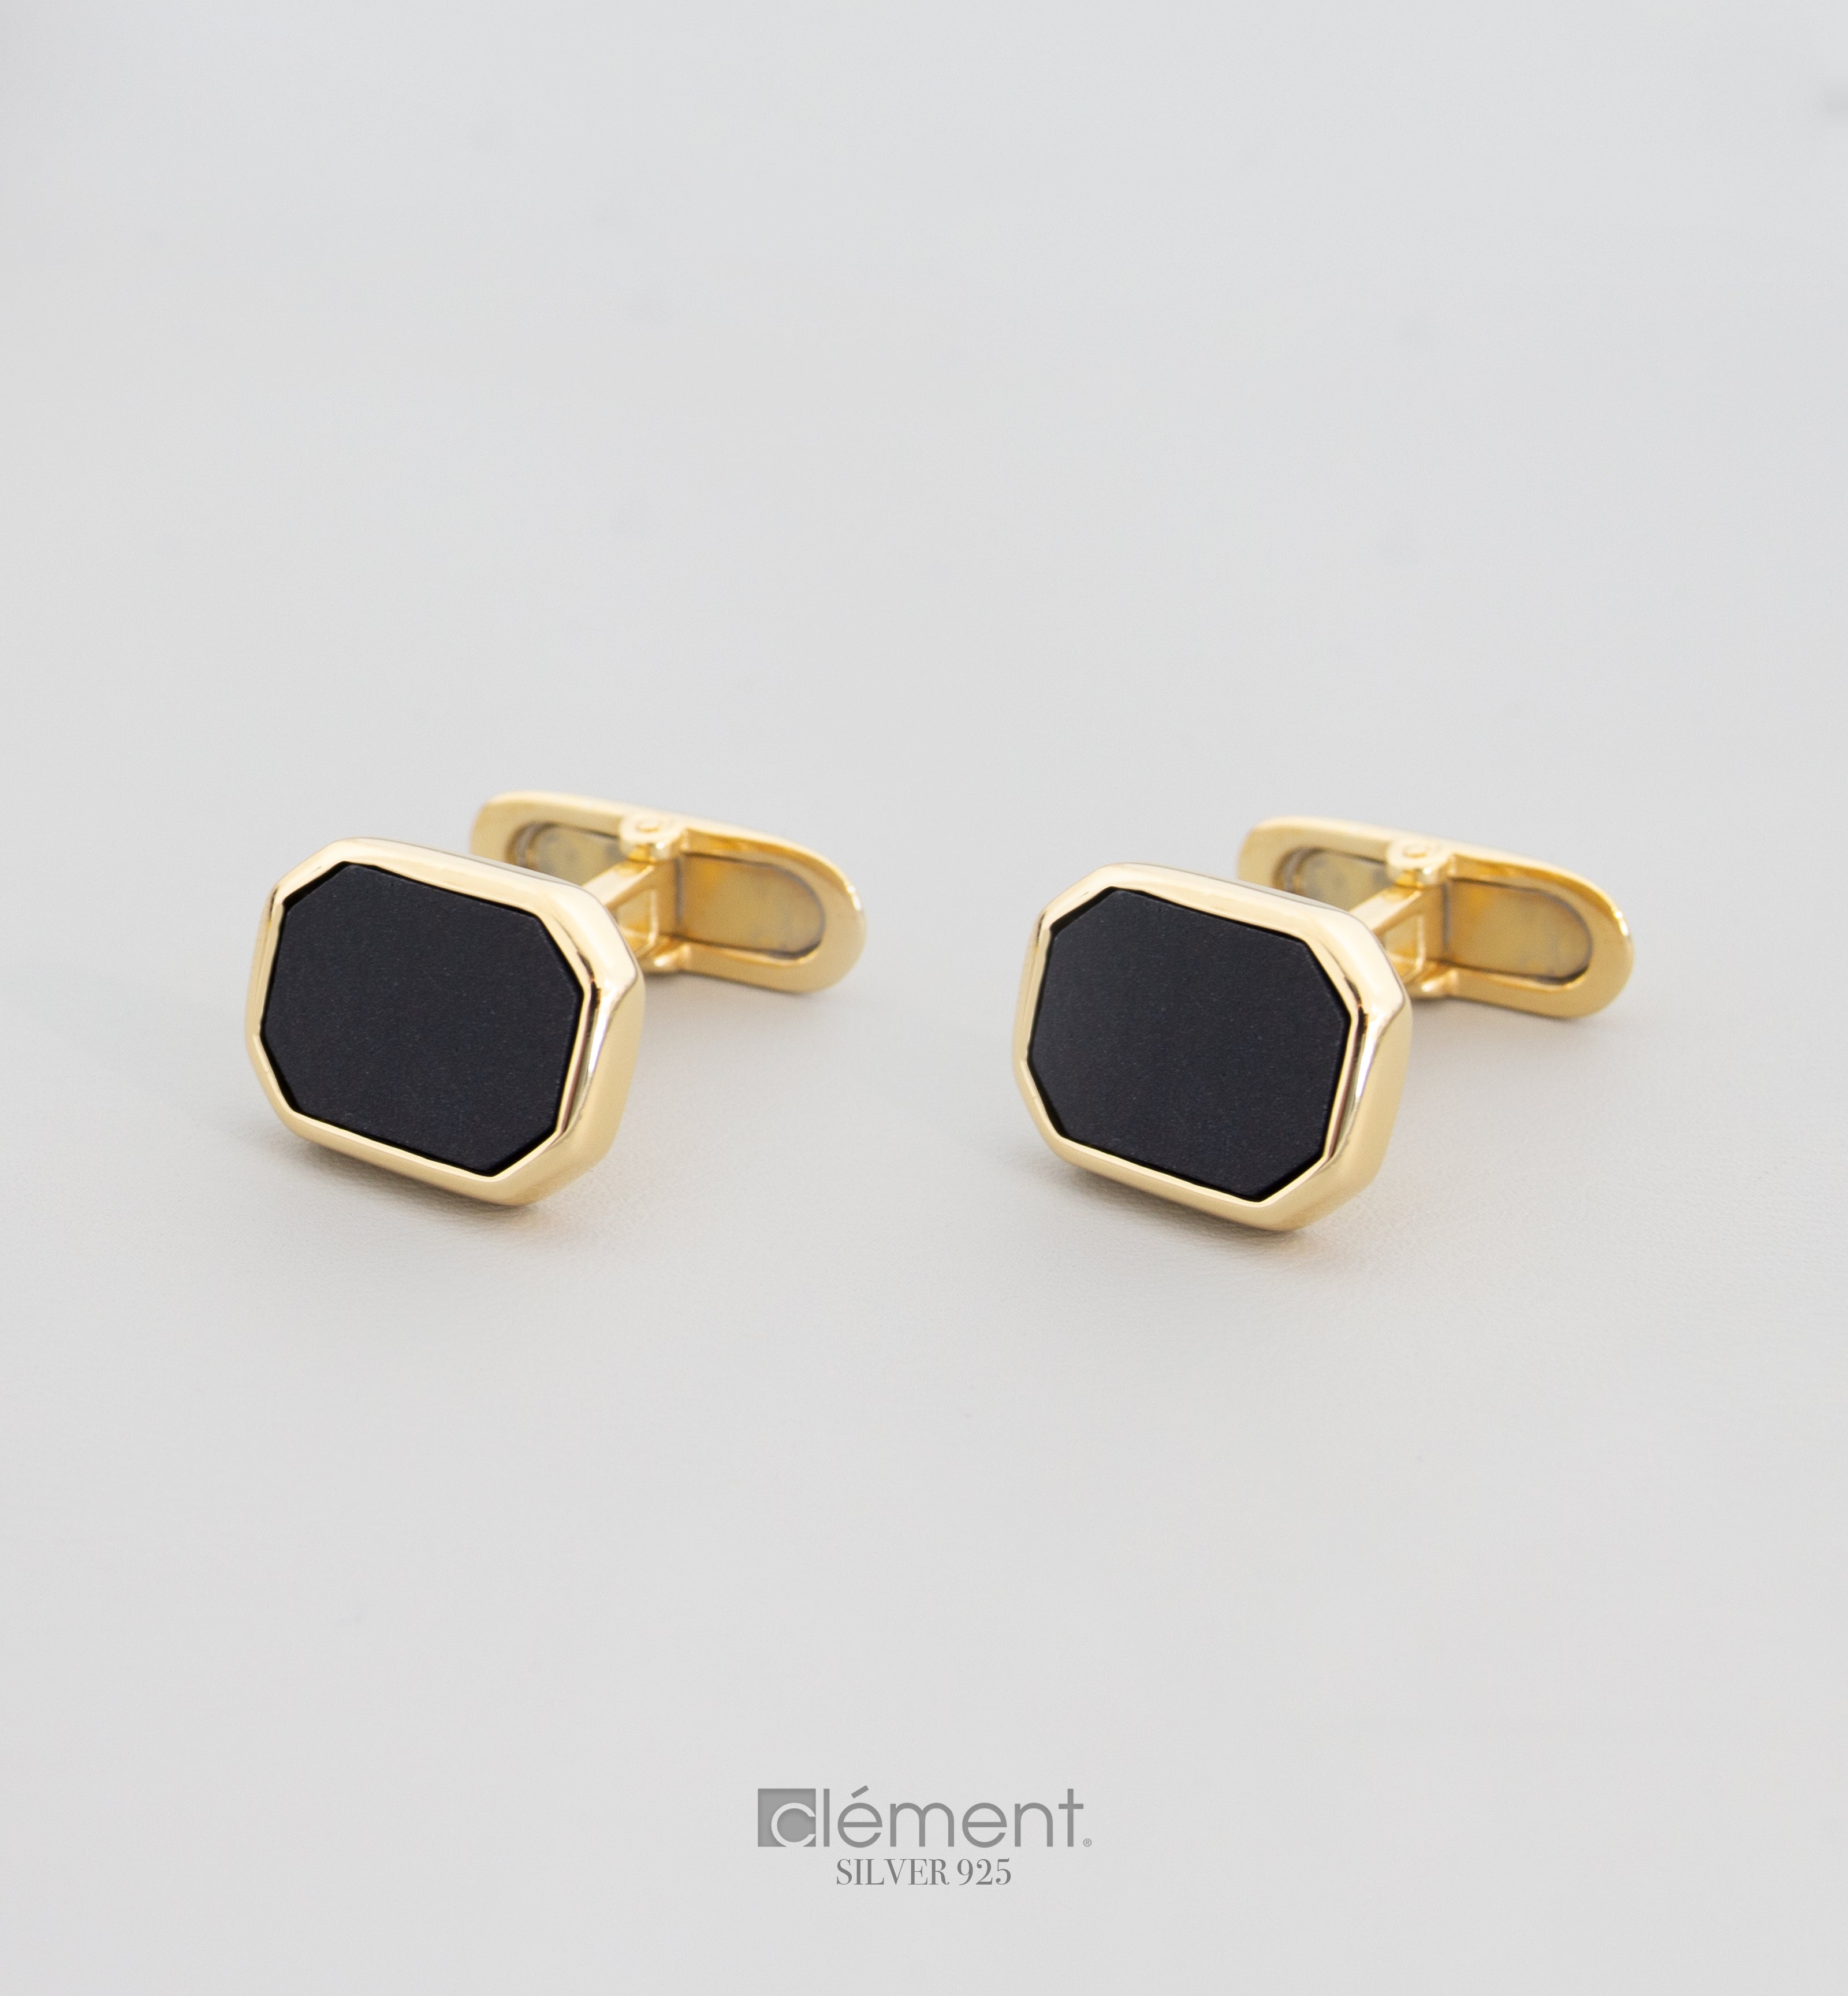 Silver 925 Rectangle Cufflinks with Black Onyx